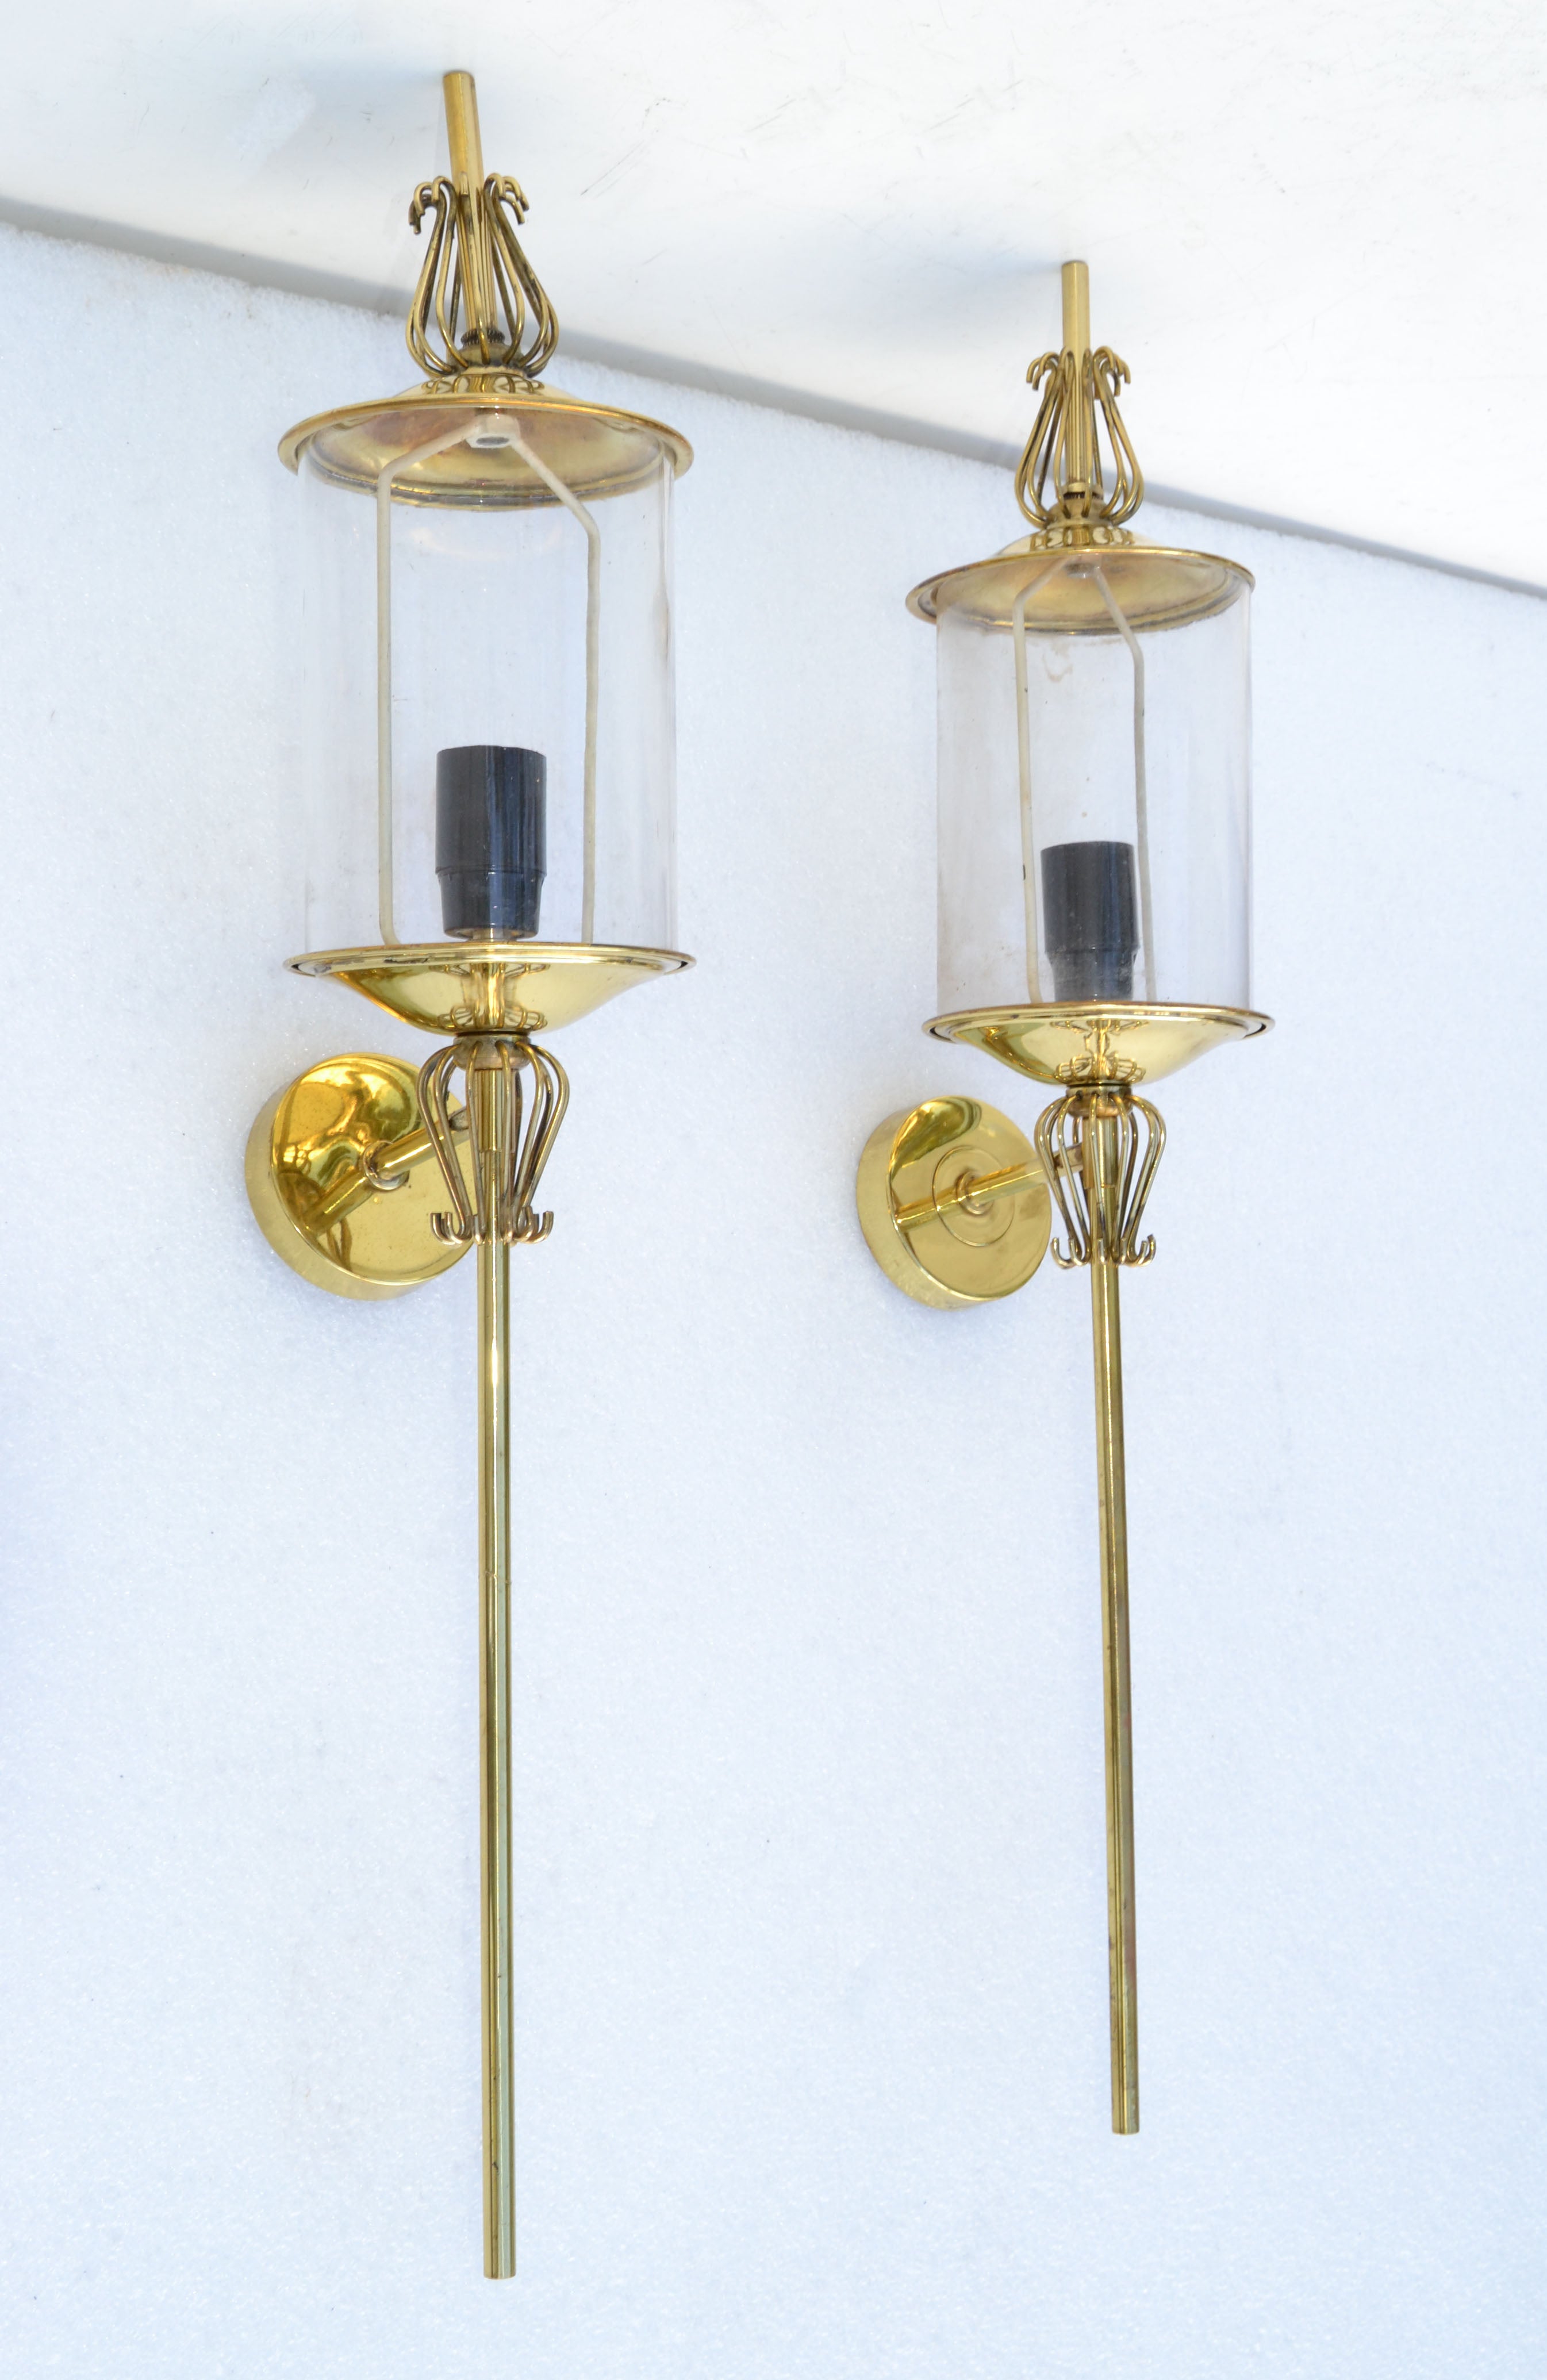 Very unusual and elegant pair of wall lantern sconces by Lunel France Paris. 
Brass Core with 1 light glass Lantern. 
We have three pair sconces available. Priced by Pair. 
US wired and in working condition. Each Sconce takes 1 candelabra light